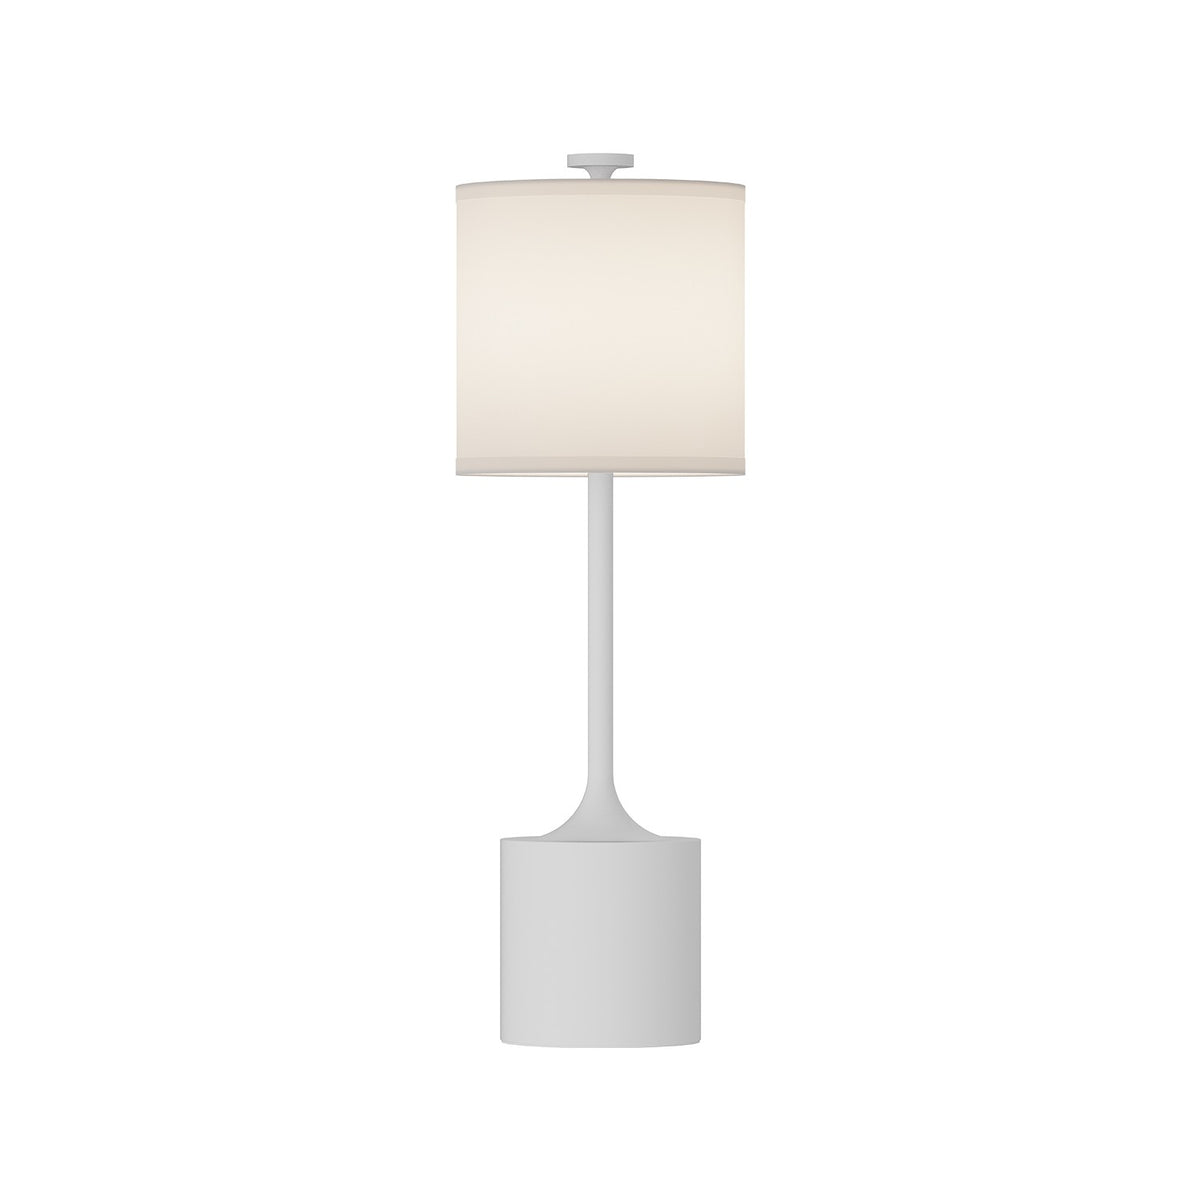 Alora Canada - TL418726WHIL - One Light Table Lamp - Issa - White/Ivory Linen